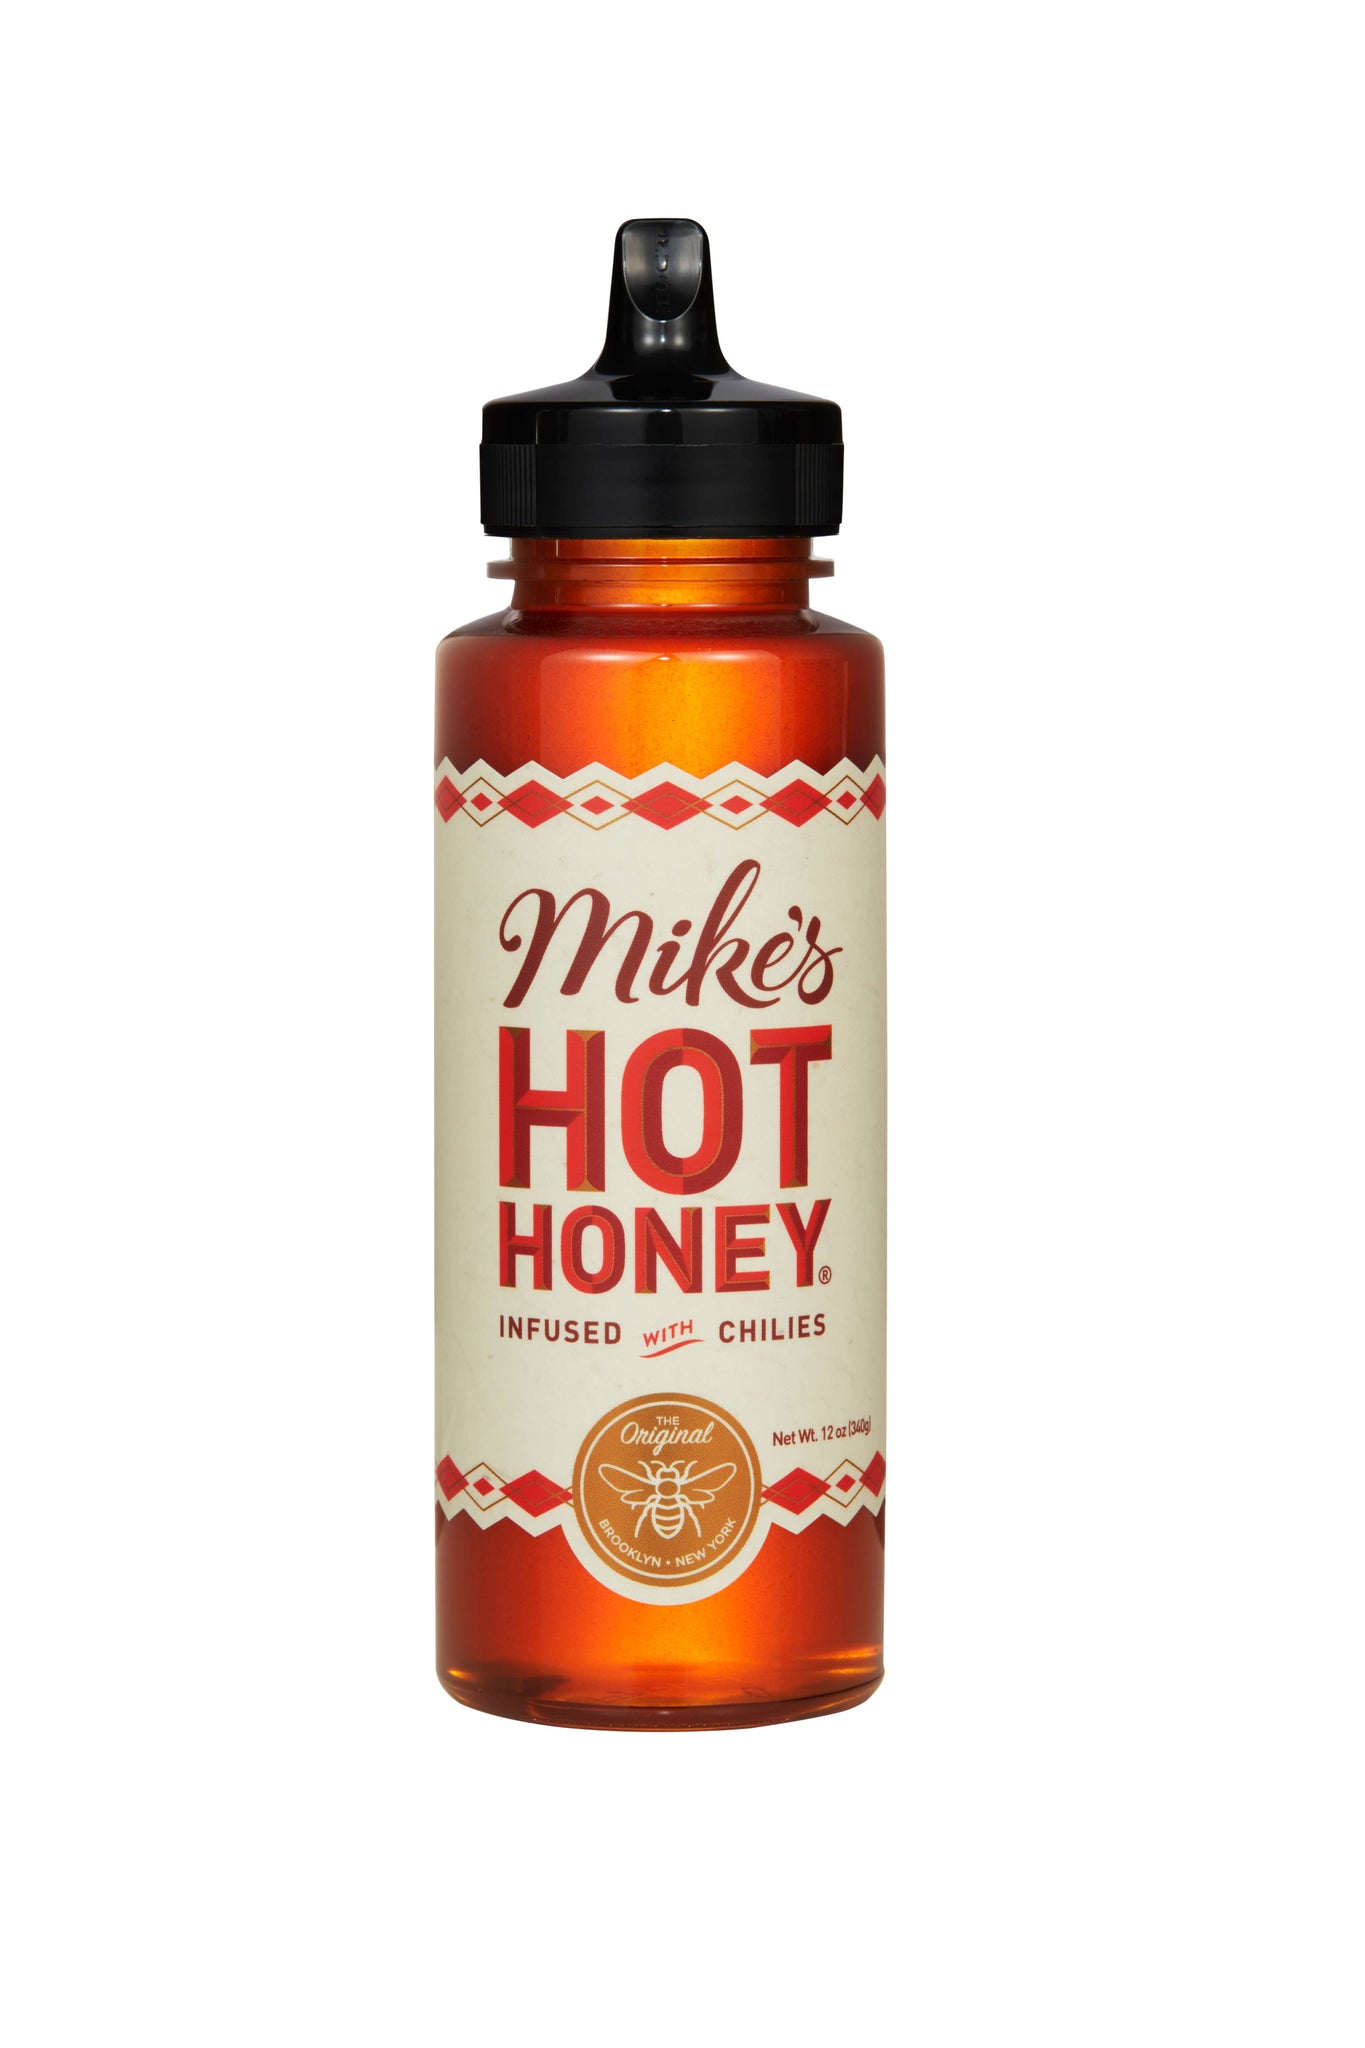 Mike's Hot Honey 12 oz Squeeze Bottle (case of 6)